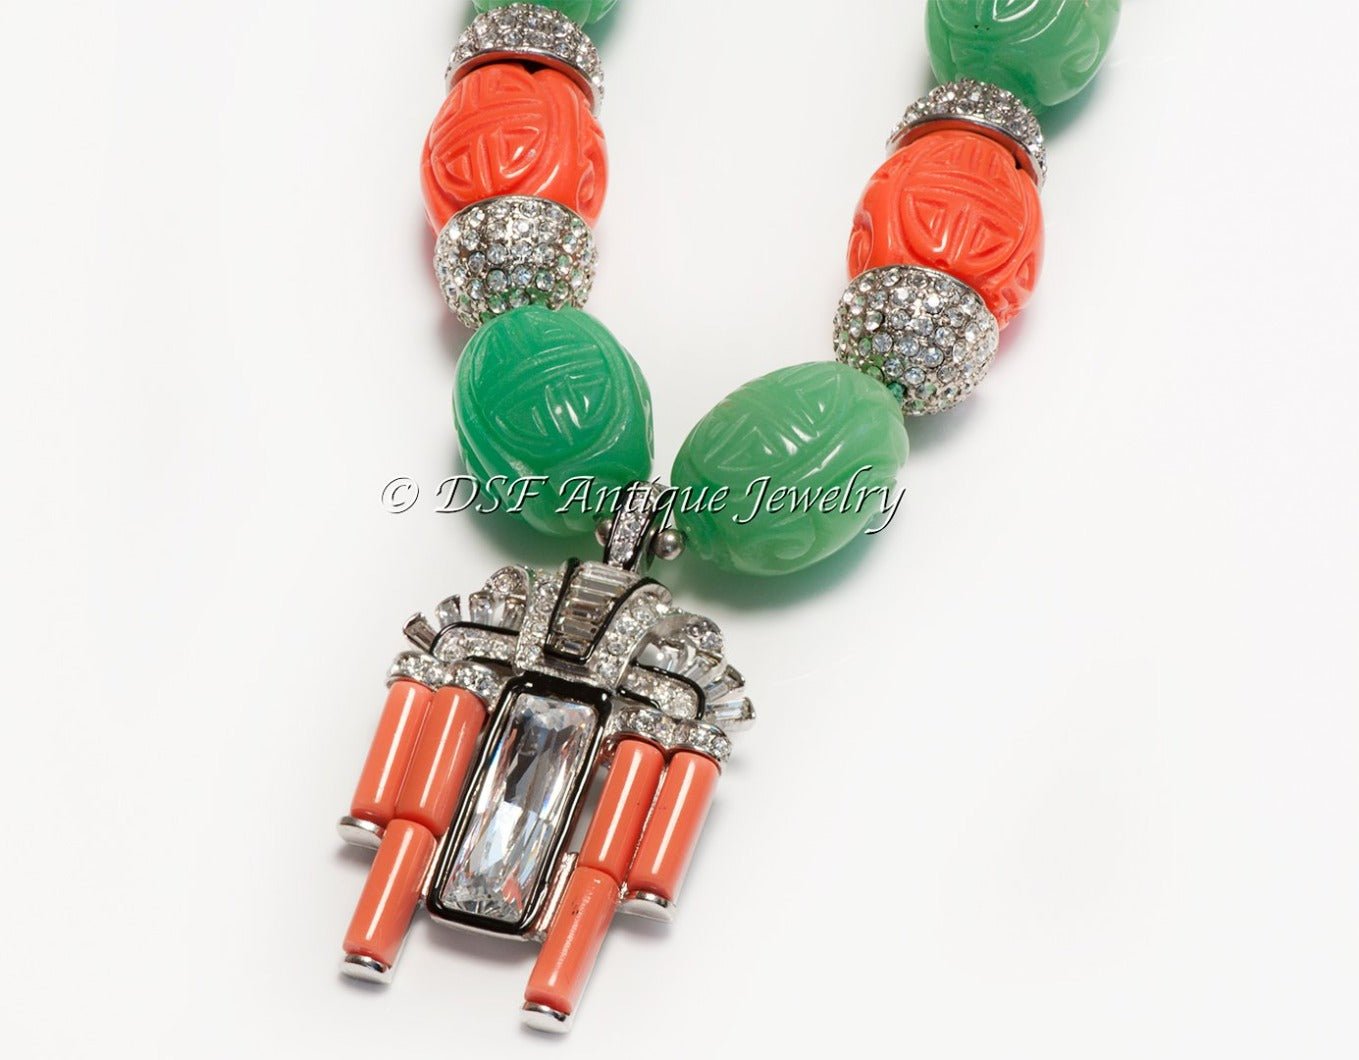 Kenneth Jay Lane Art Deco Style Faux Jade Coral Carved Beads Necklace